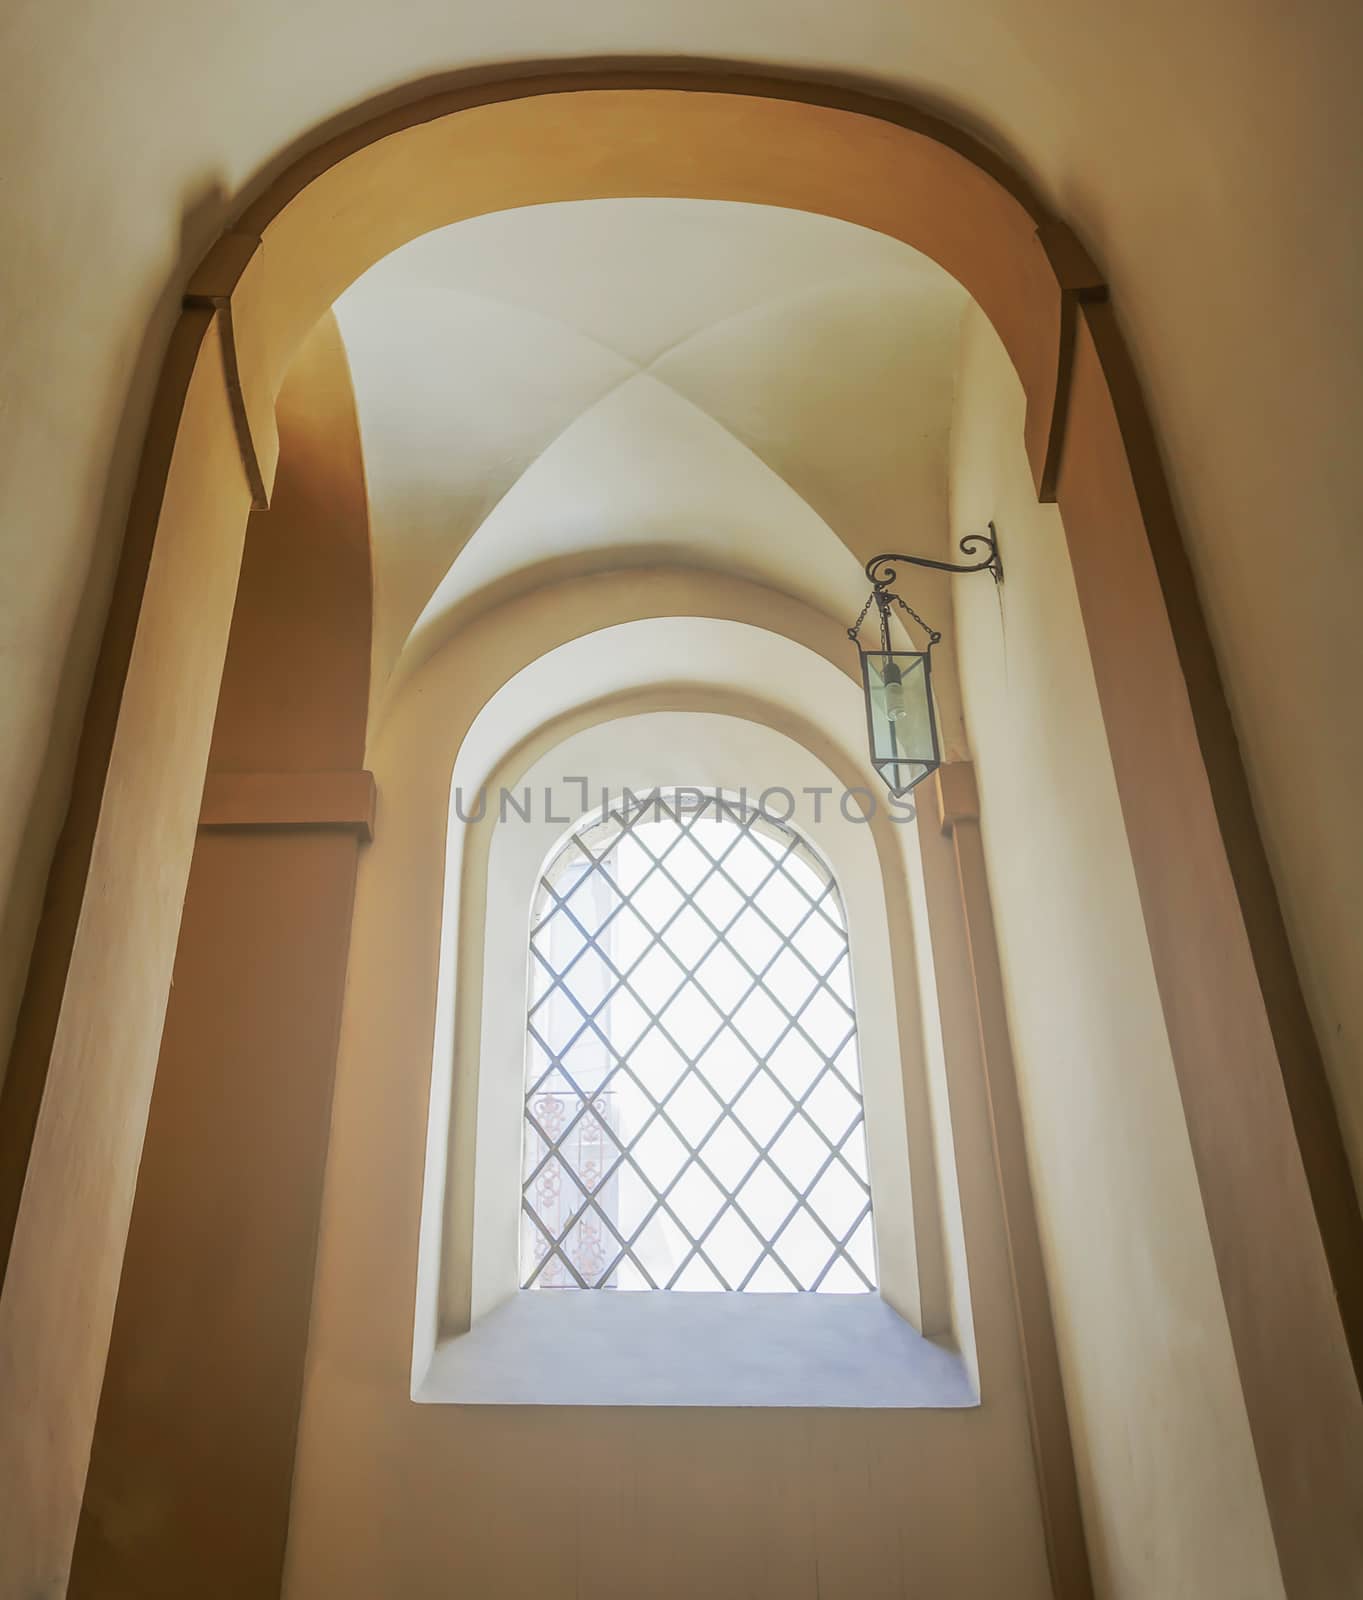 ancient stairwell with architectural arches and ribbed vault